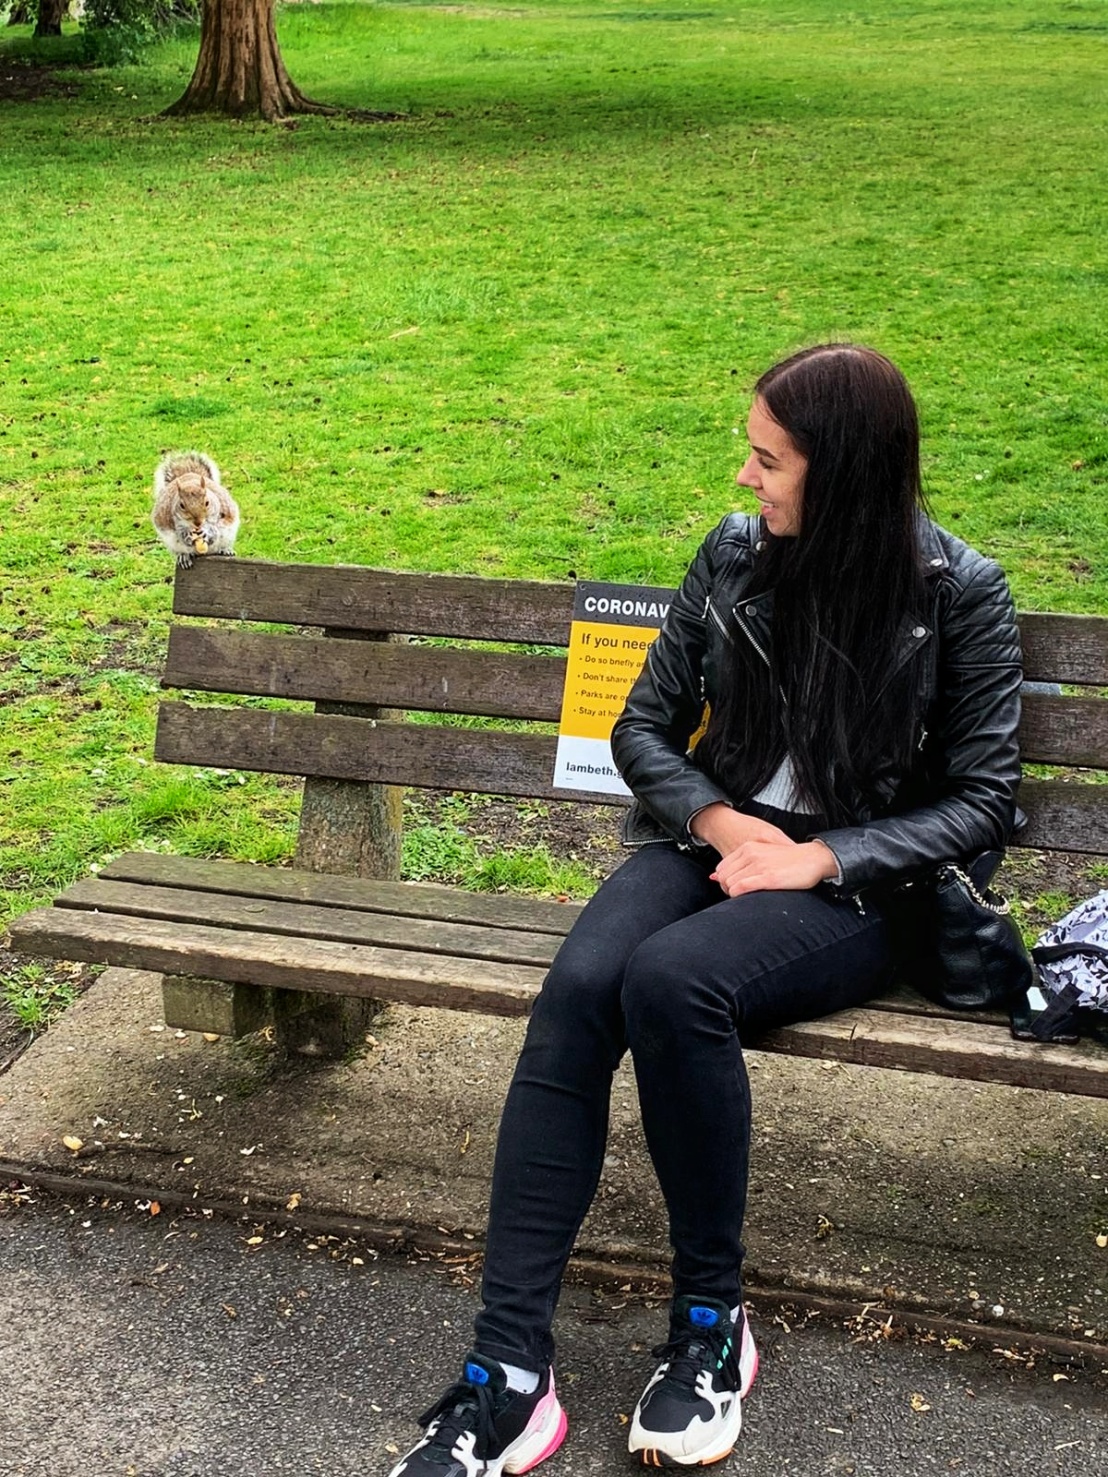 A red squirrel on a bench next to a woman - Ruskin Park, London